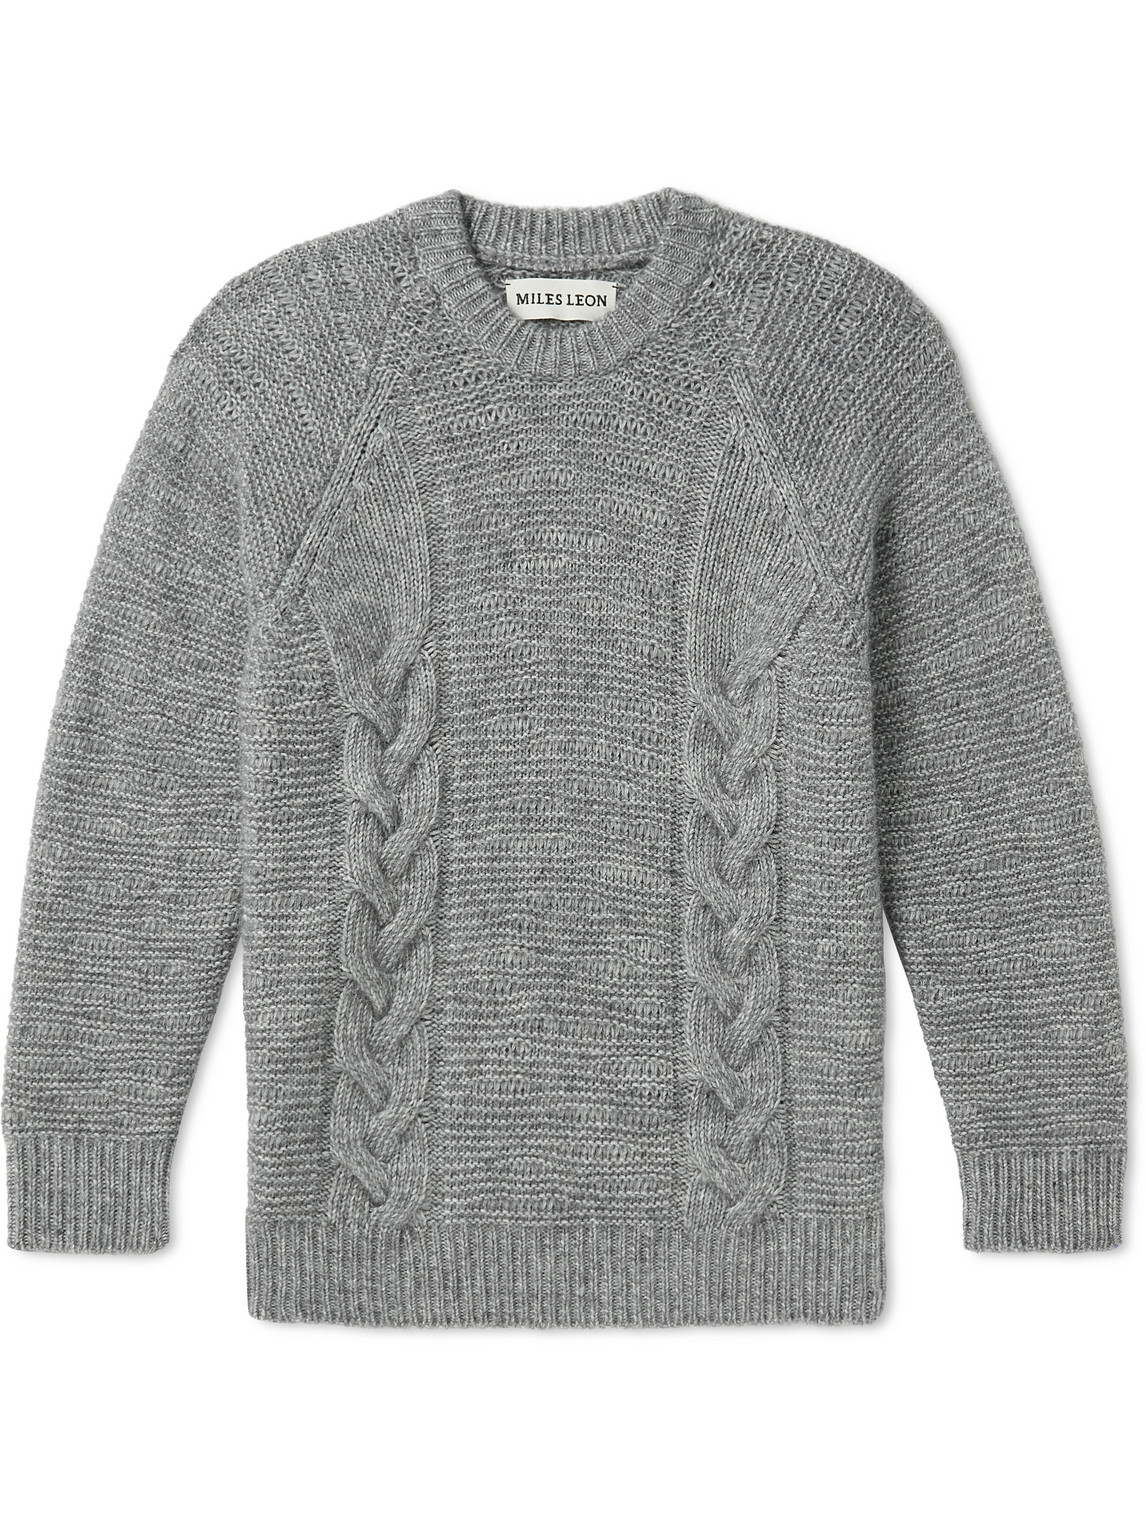 Miles Leon Cable-knit Cotton, Alpaca And Merino Wool-blend Sweater In Gray